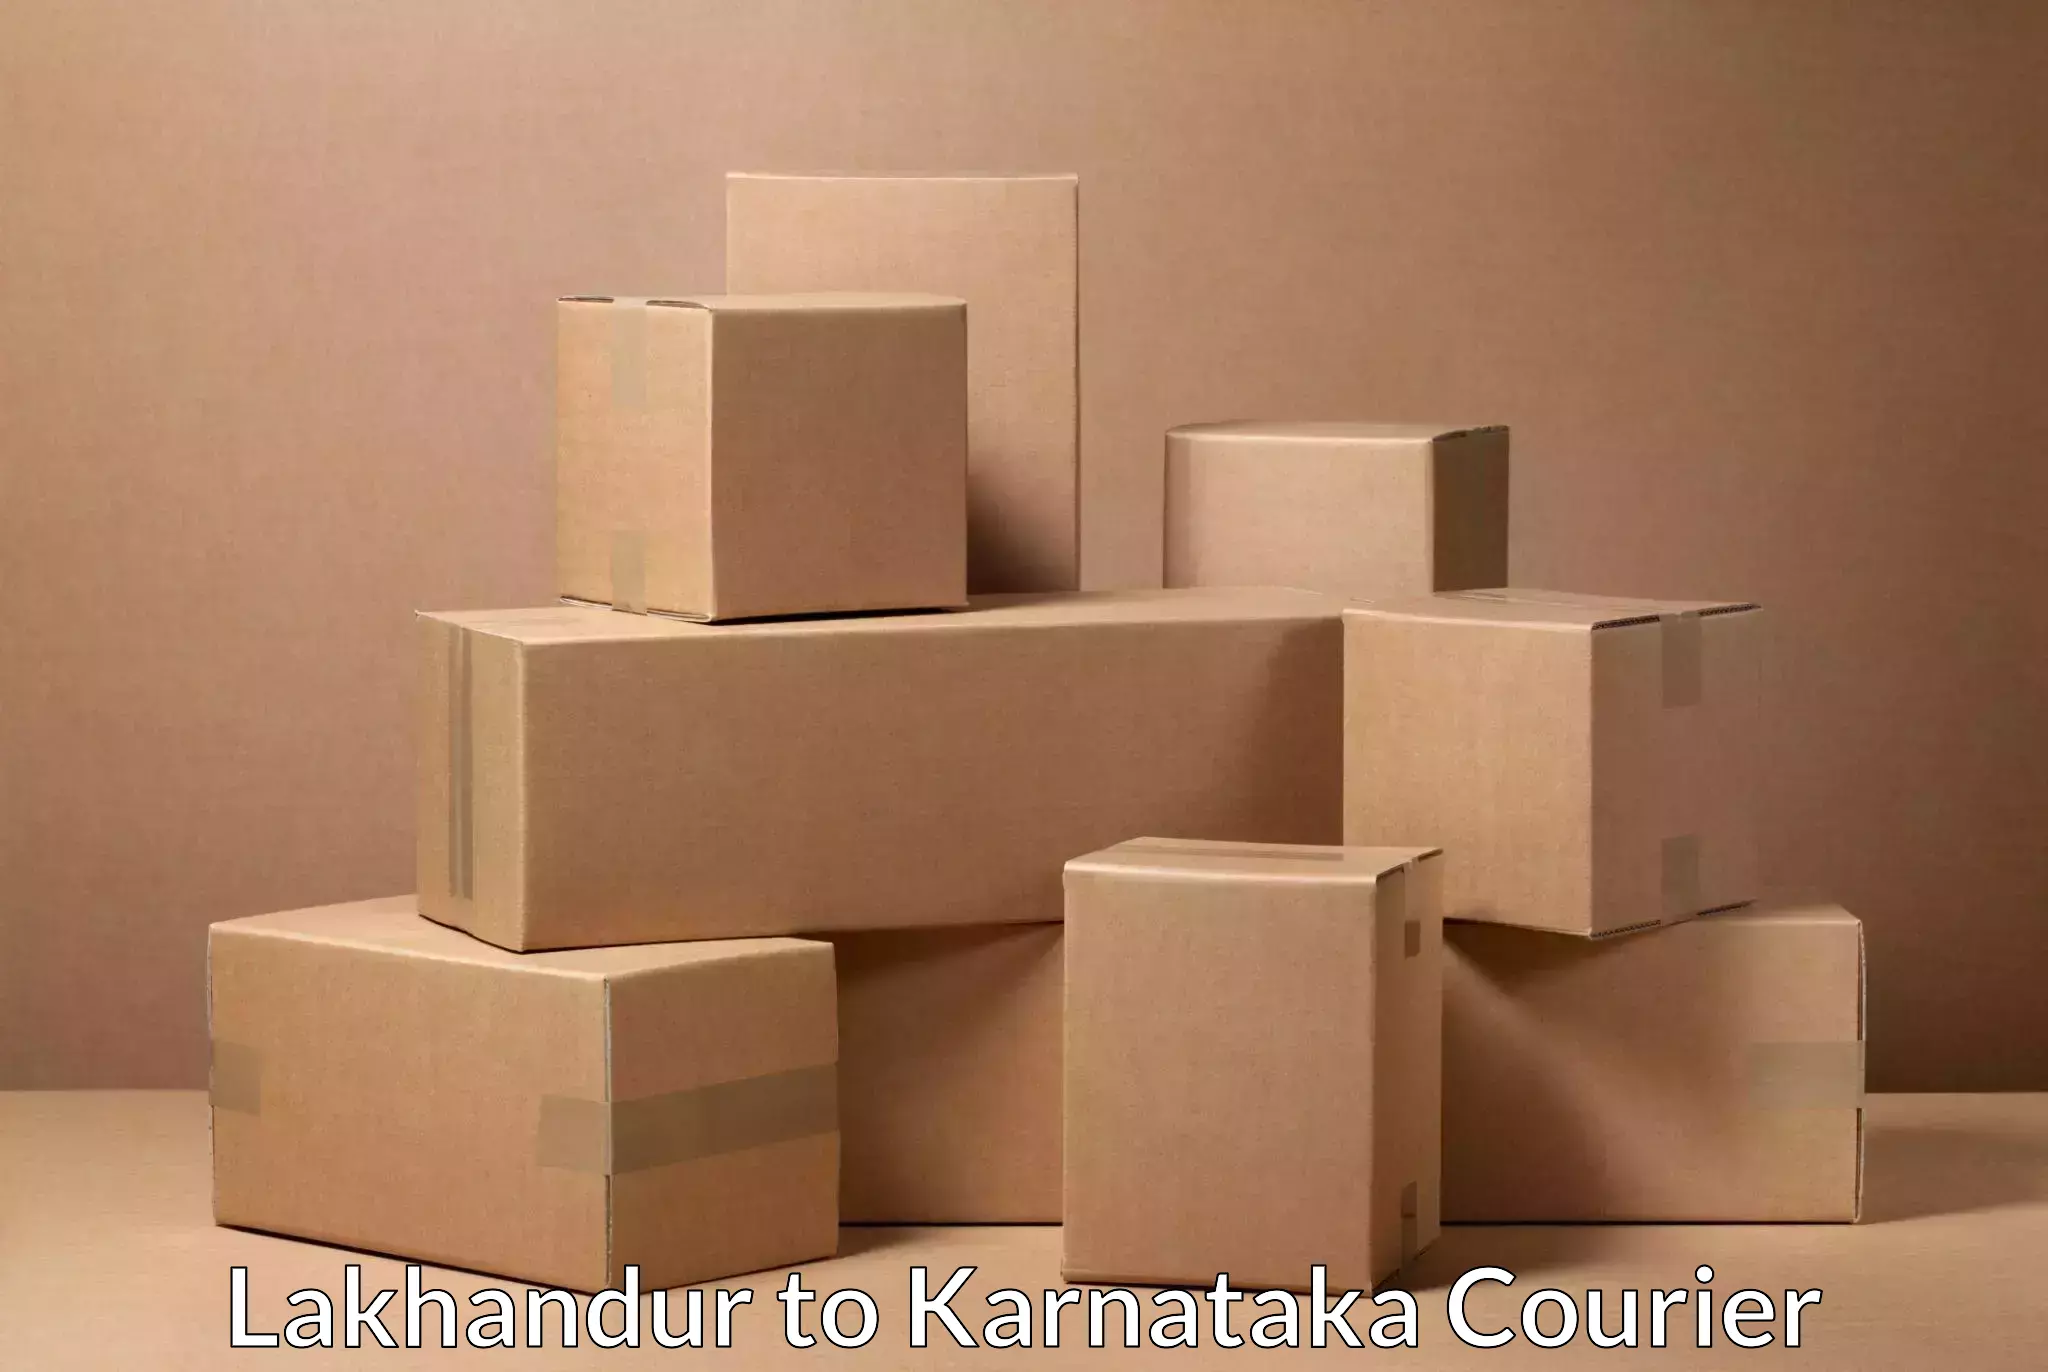 Courier service comparison Lakhandur to yedrami